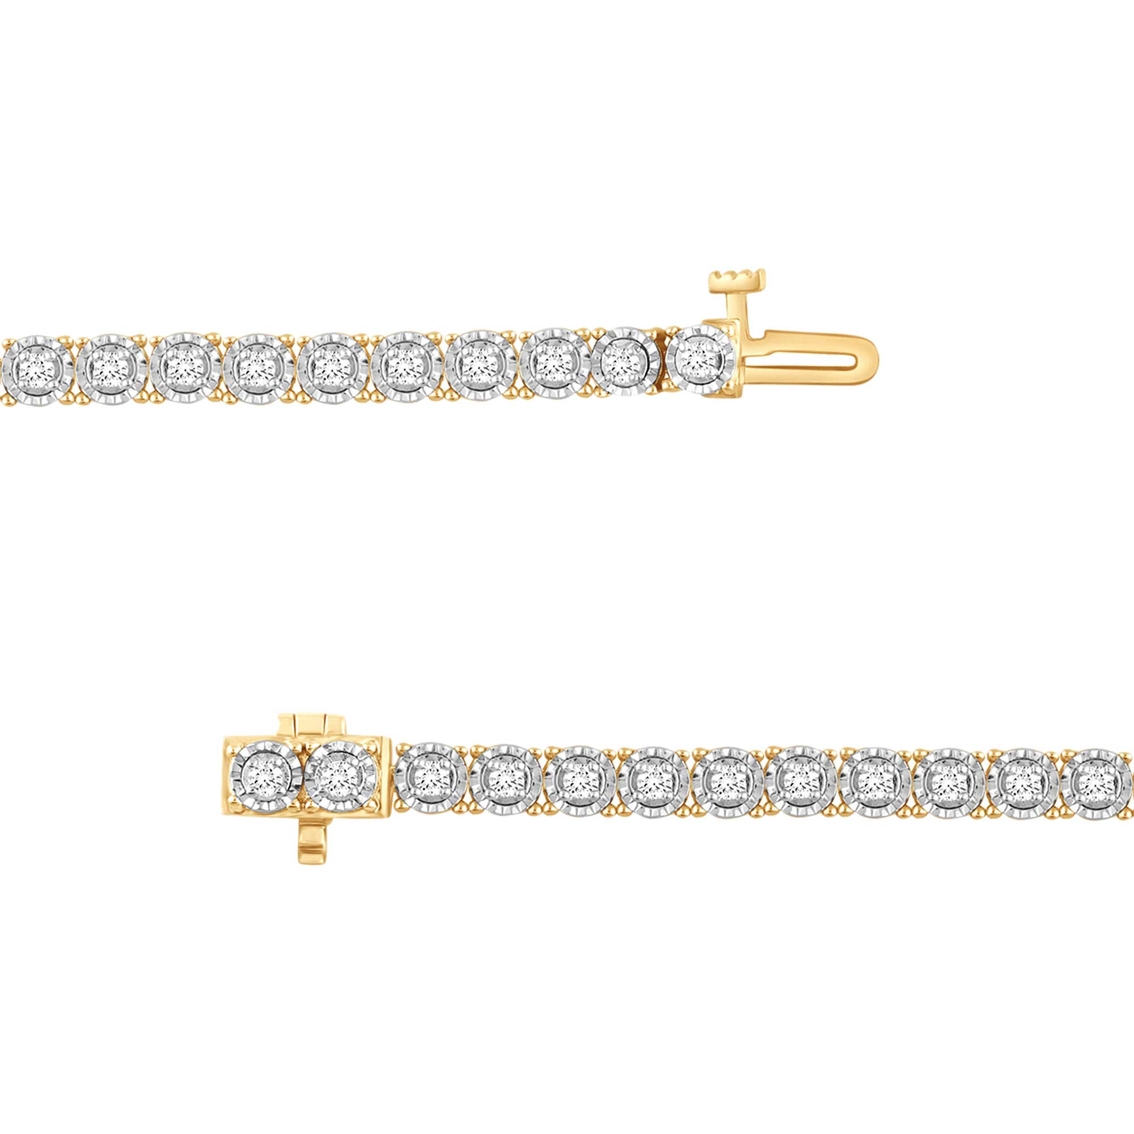 Gold Over Sterling Silver 1 CTW Diamond Tennis Bracelet - Image 3 of 3